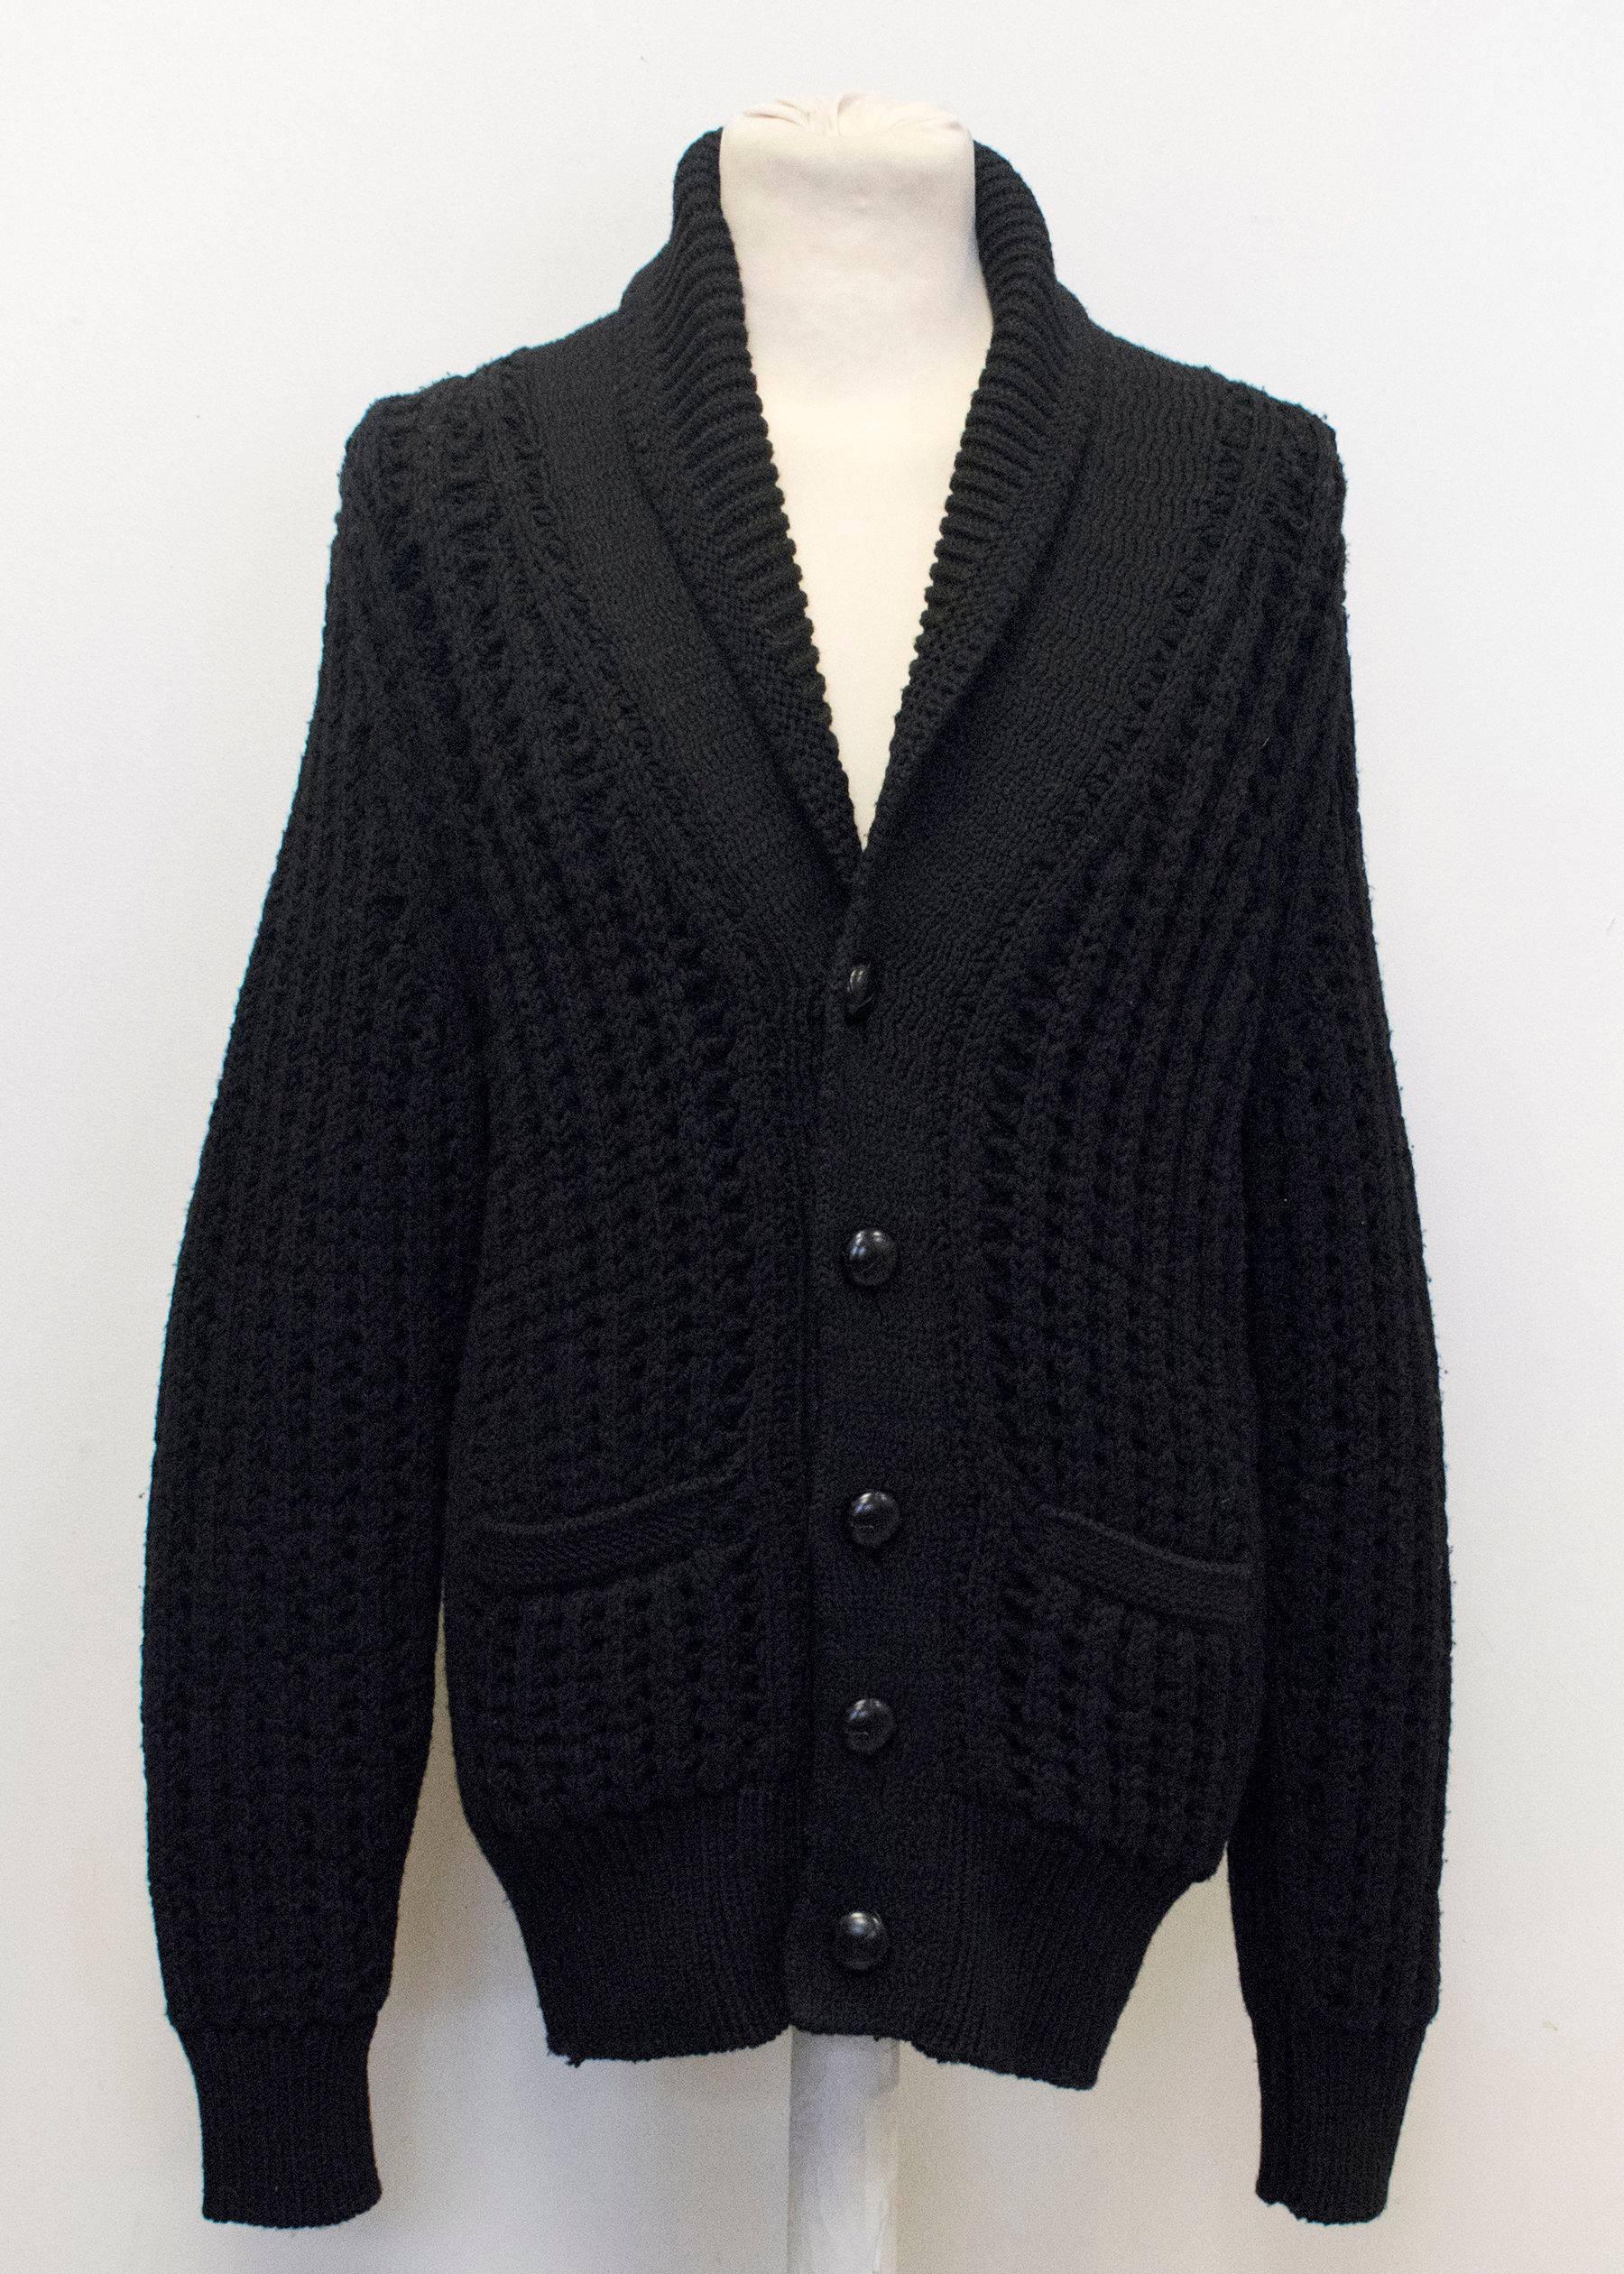 Tom Ford Men's Chunky Black Cable Knit Cardigan For Sale 3